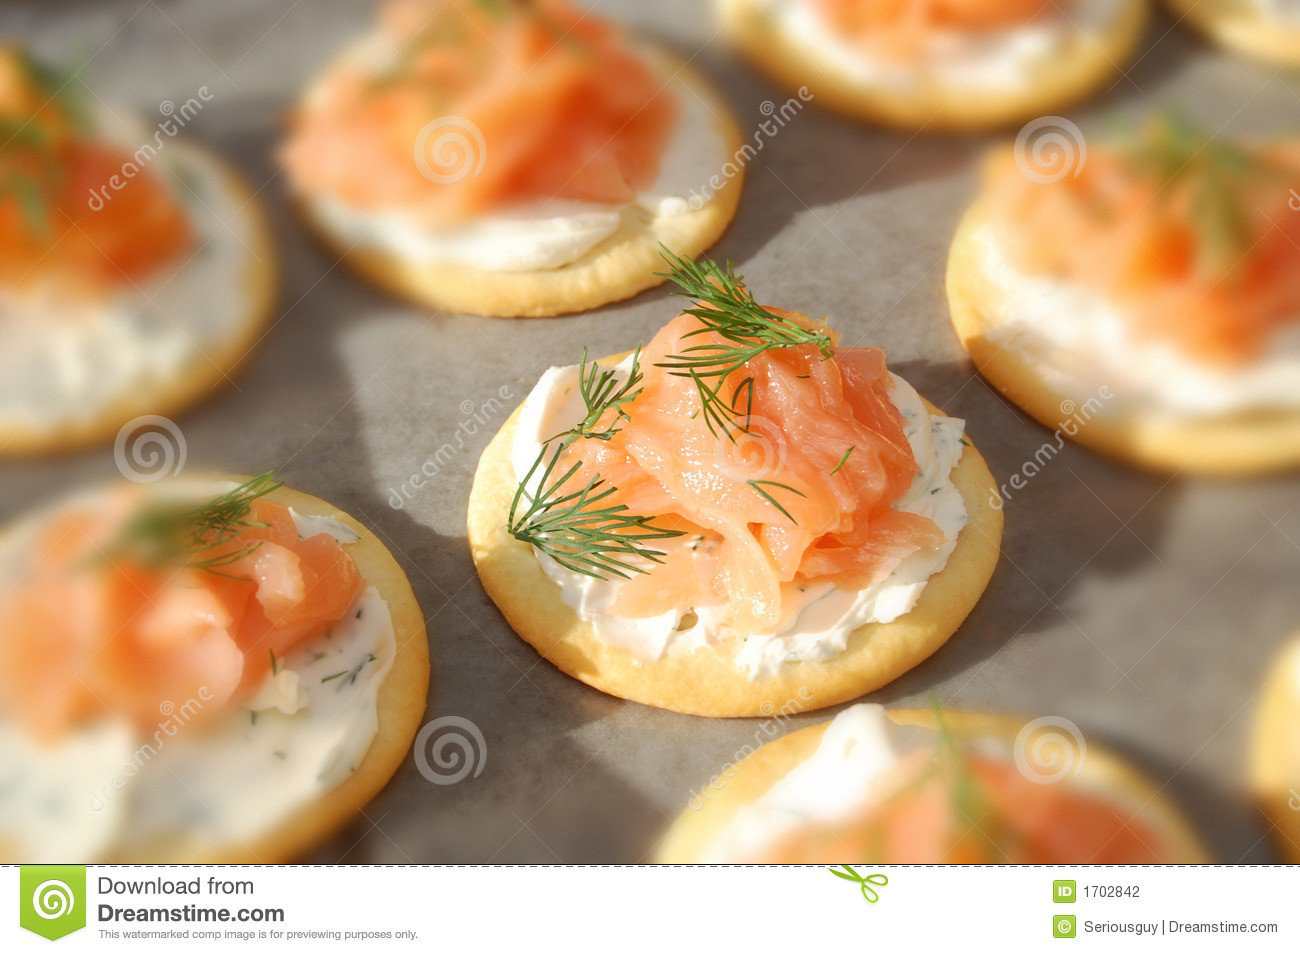 Smoked Salmon And Crackers Appetizer
 Smoked Salmon Cream Cheese And Dill Crackers Stock